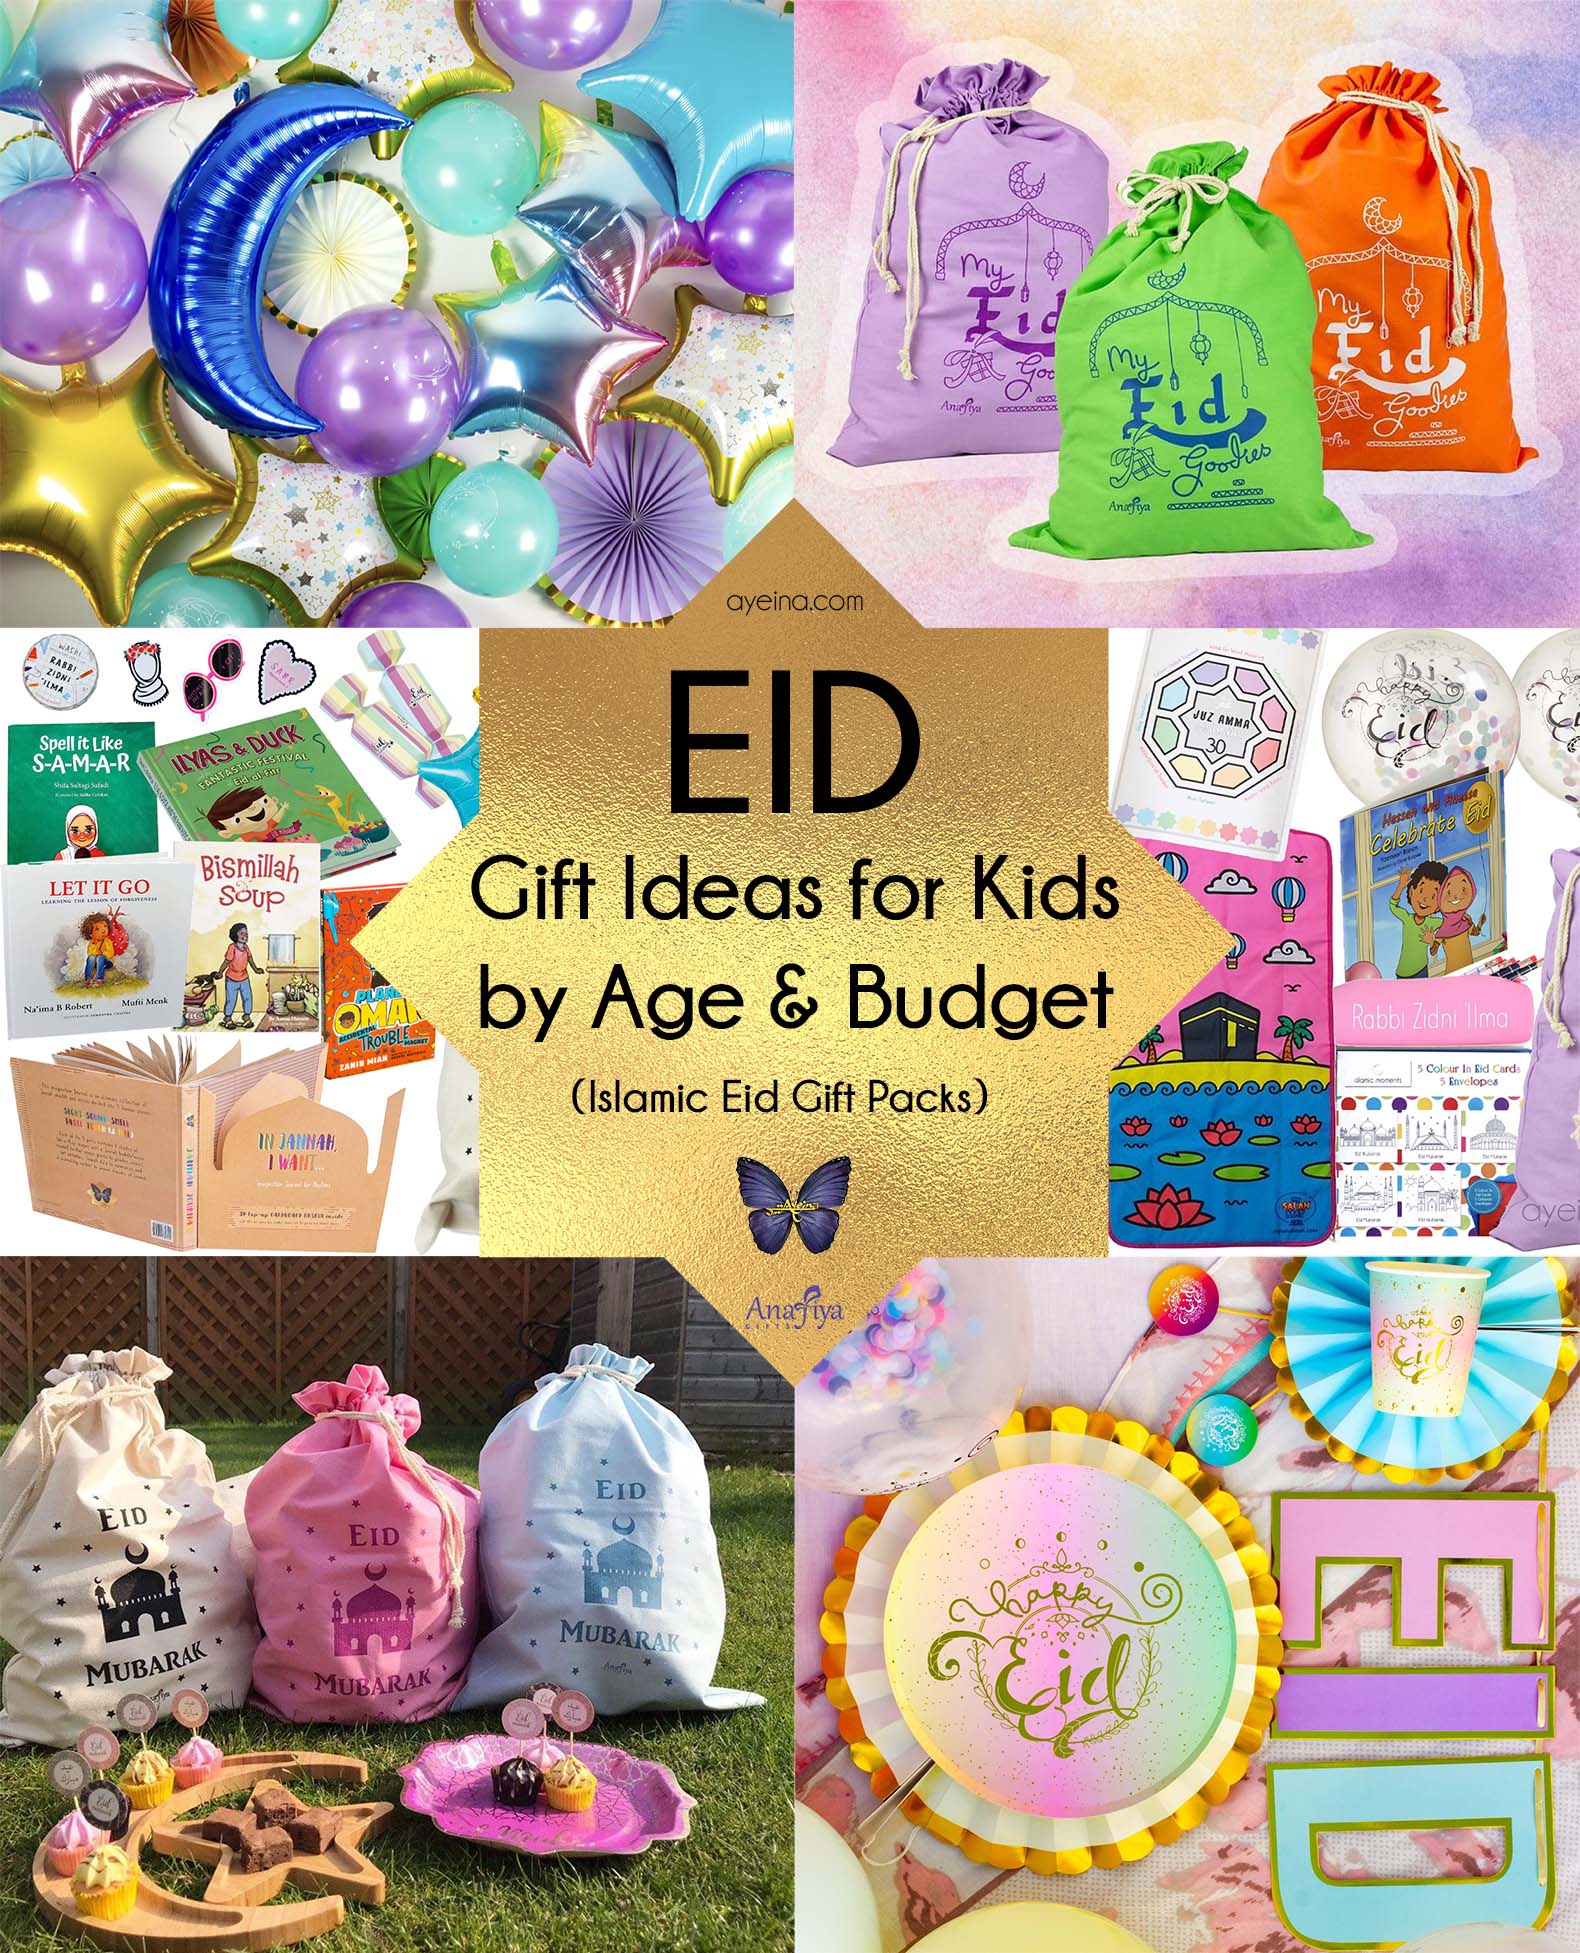 5 Perfect Eid Gift Ideas For Your Entire Family - Ramadan 2020 Day 12